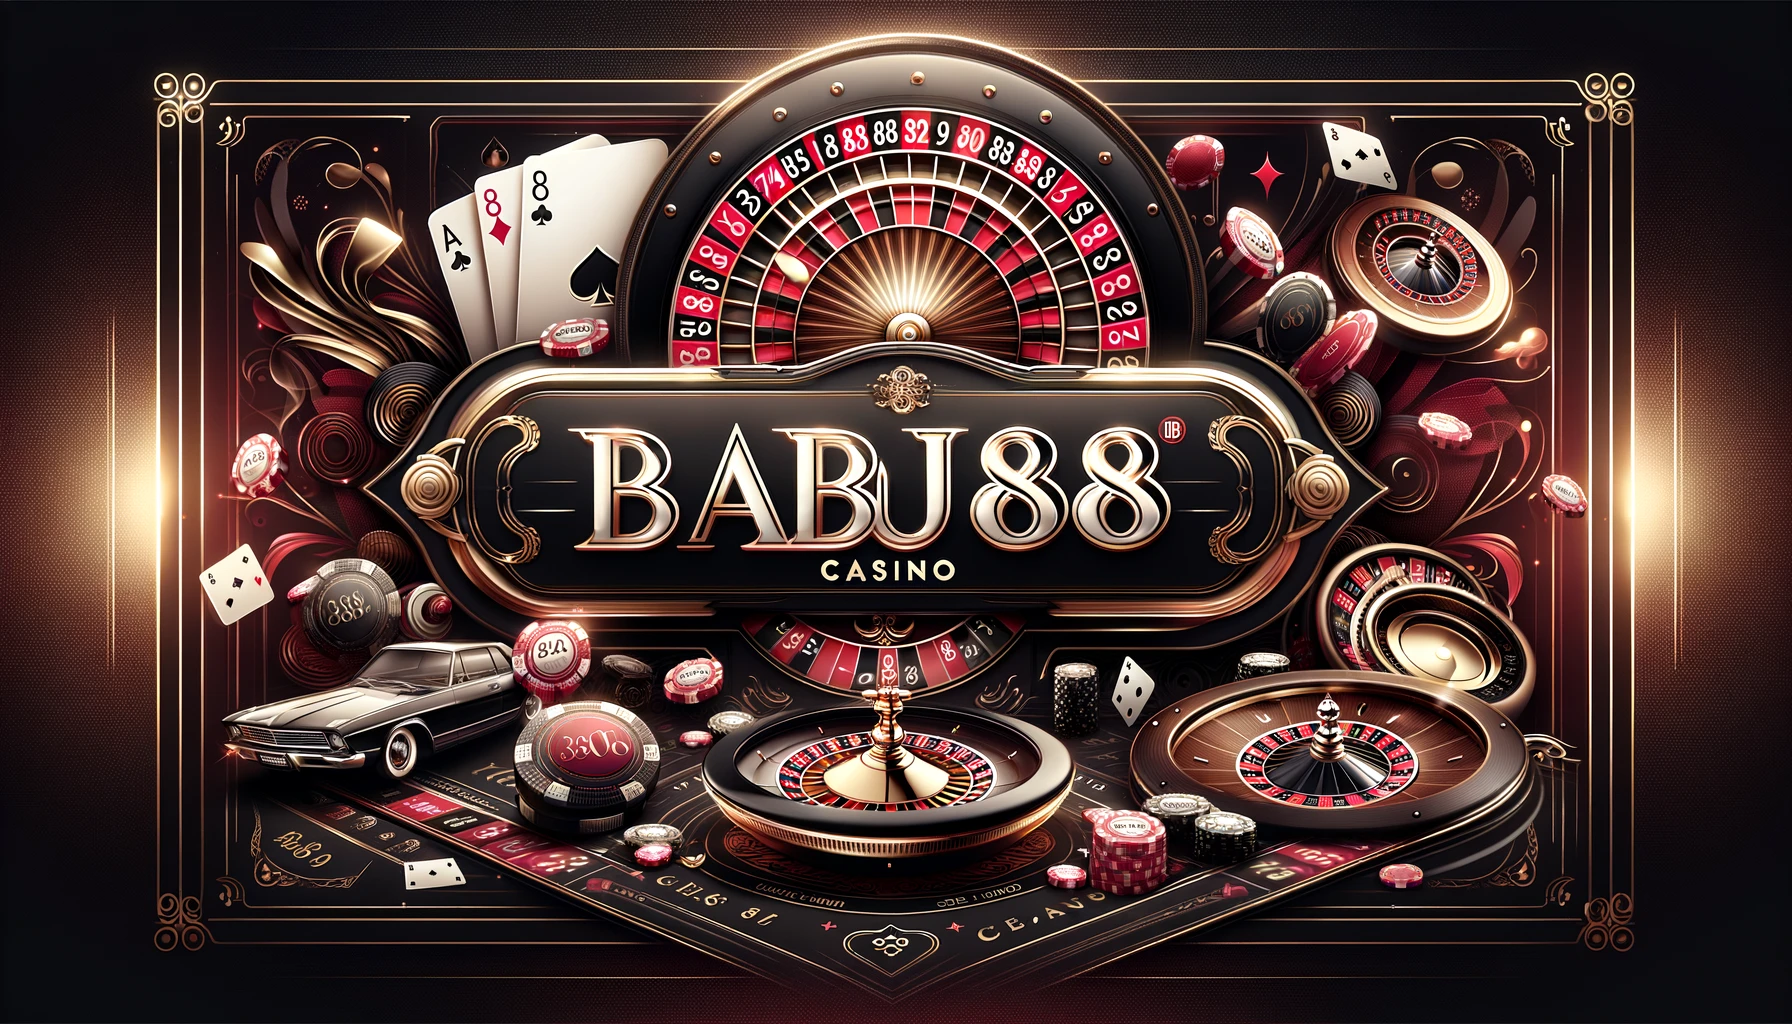 Download Babu888 App: Gateway to Exciting Online Betting